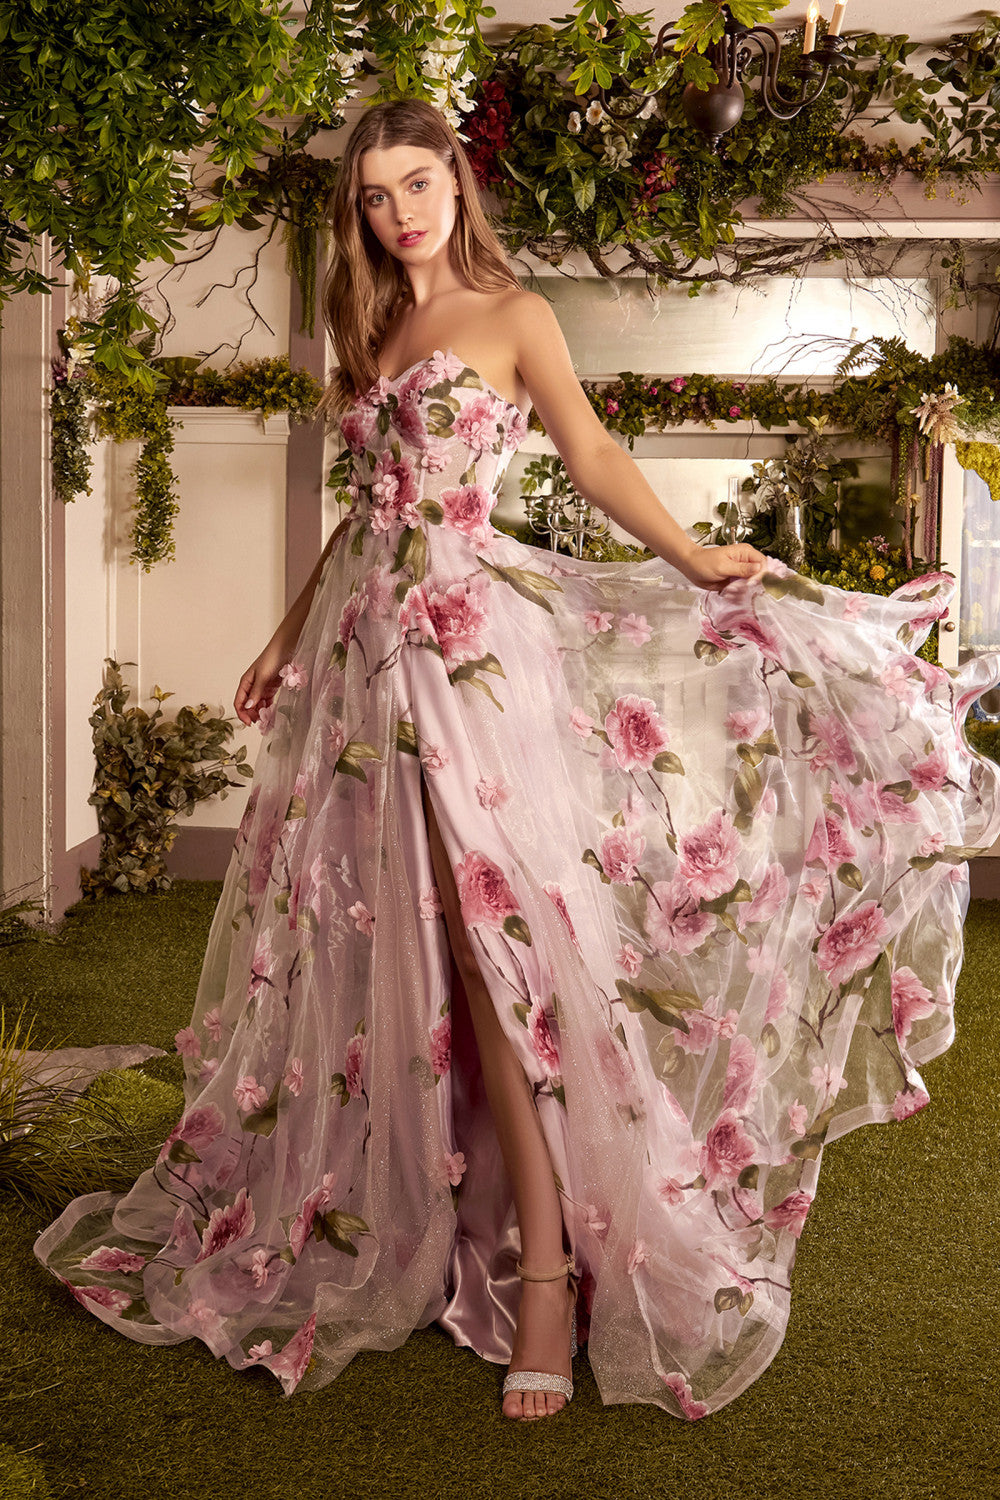 Strapless Organza Ball Gown With Floral Print by Andrea and Leo -A1035